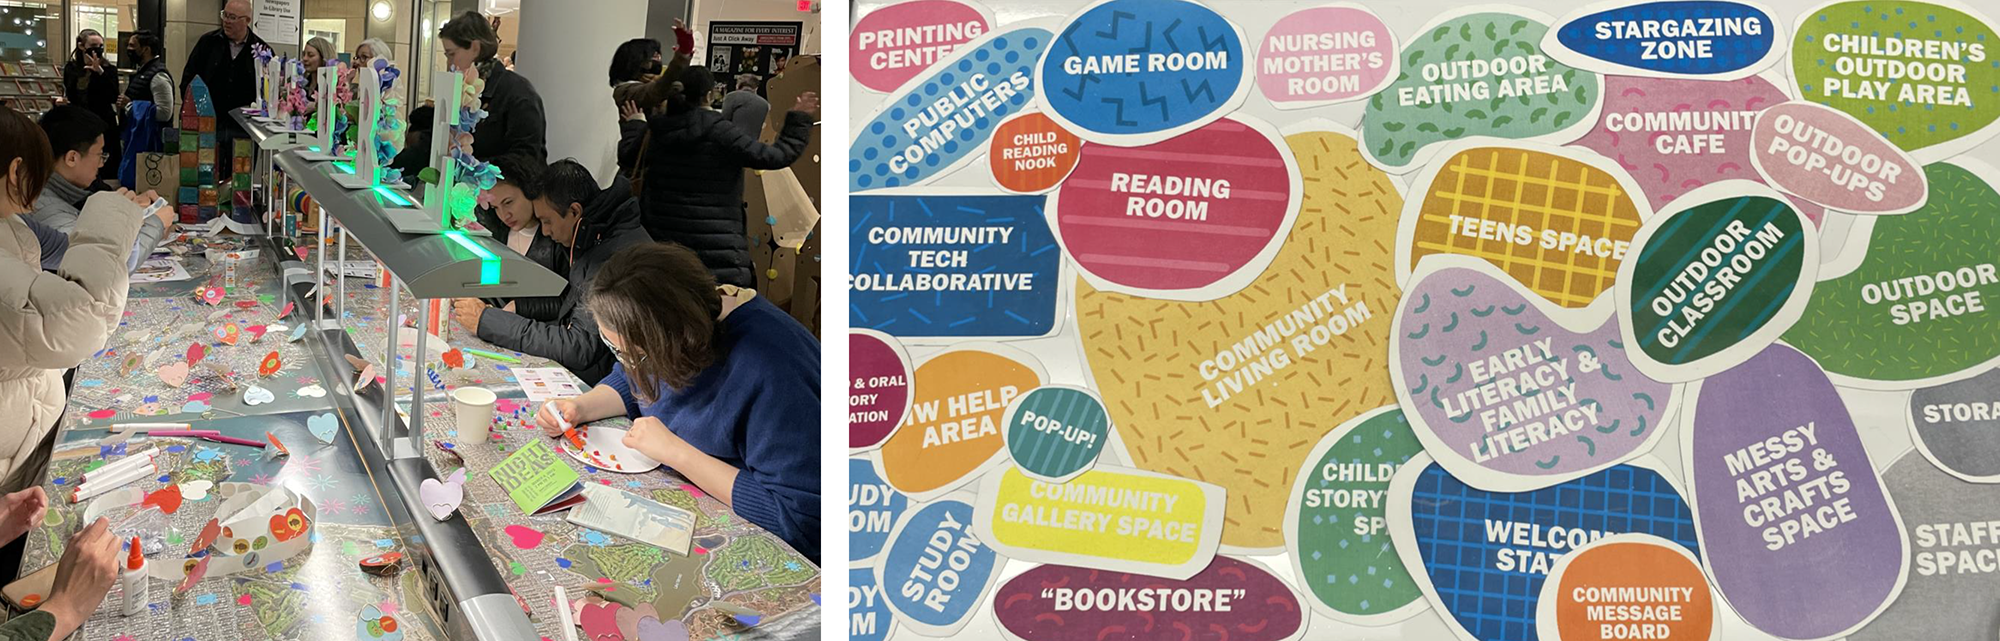 Night of Ideas Strategic Plan community art workshops using colorful shapes to arrange library spaces and programs such as reading rooms, craft areas, bookstore, or study rooms in a plan diagram. 